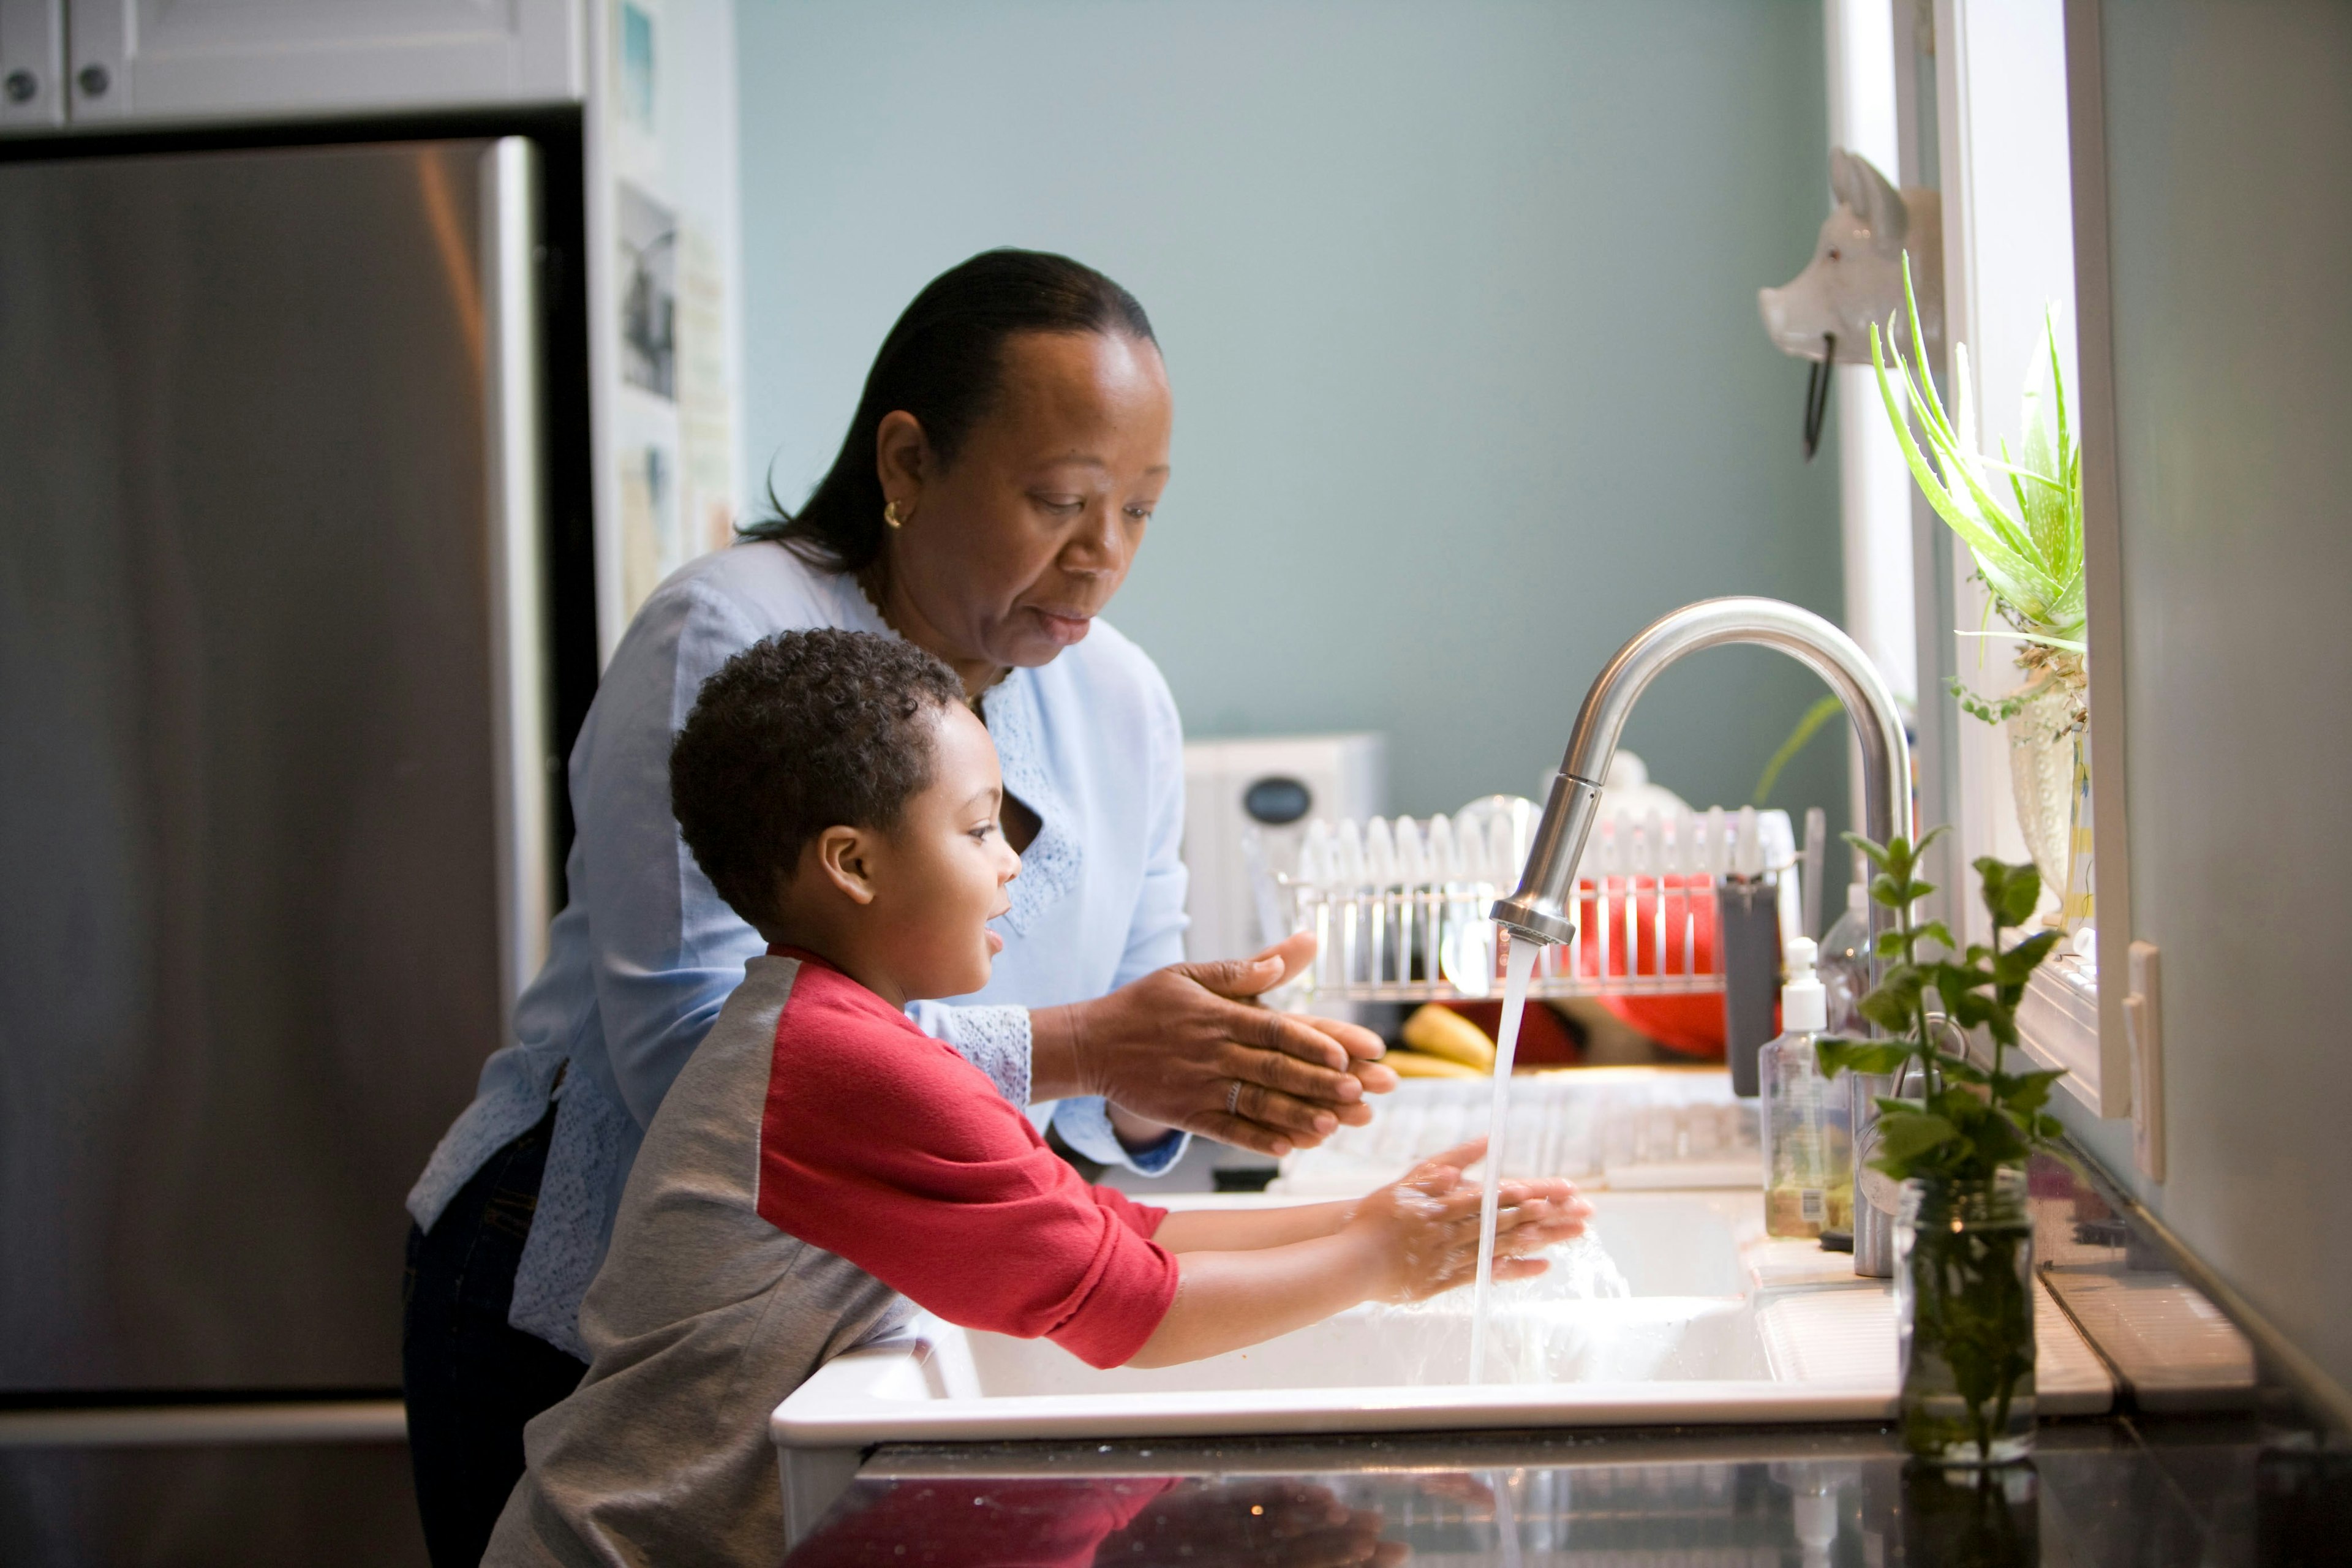 A woman and child washing their hands at the sink